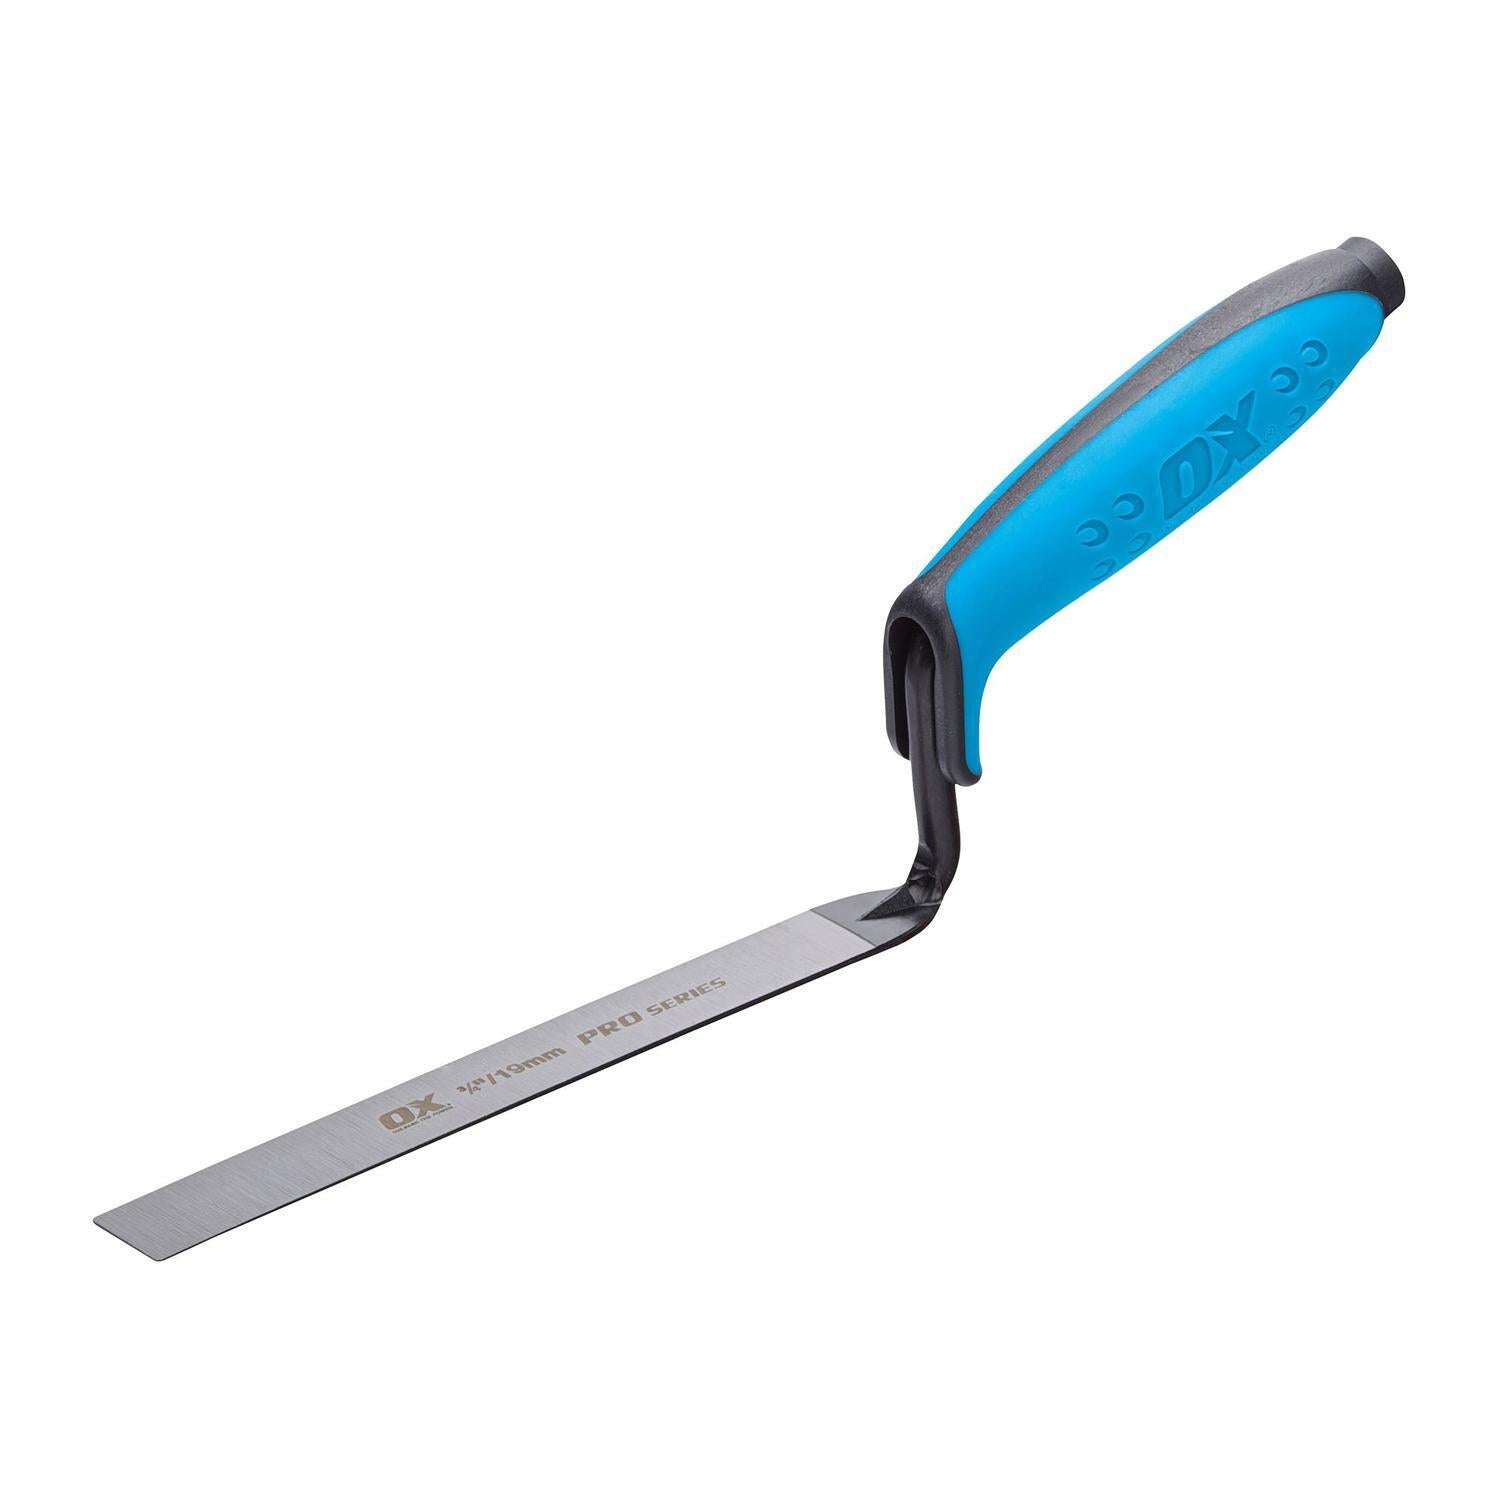 Ox Professional Professional Mortar Smoothing Tool 8mm Blue